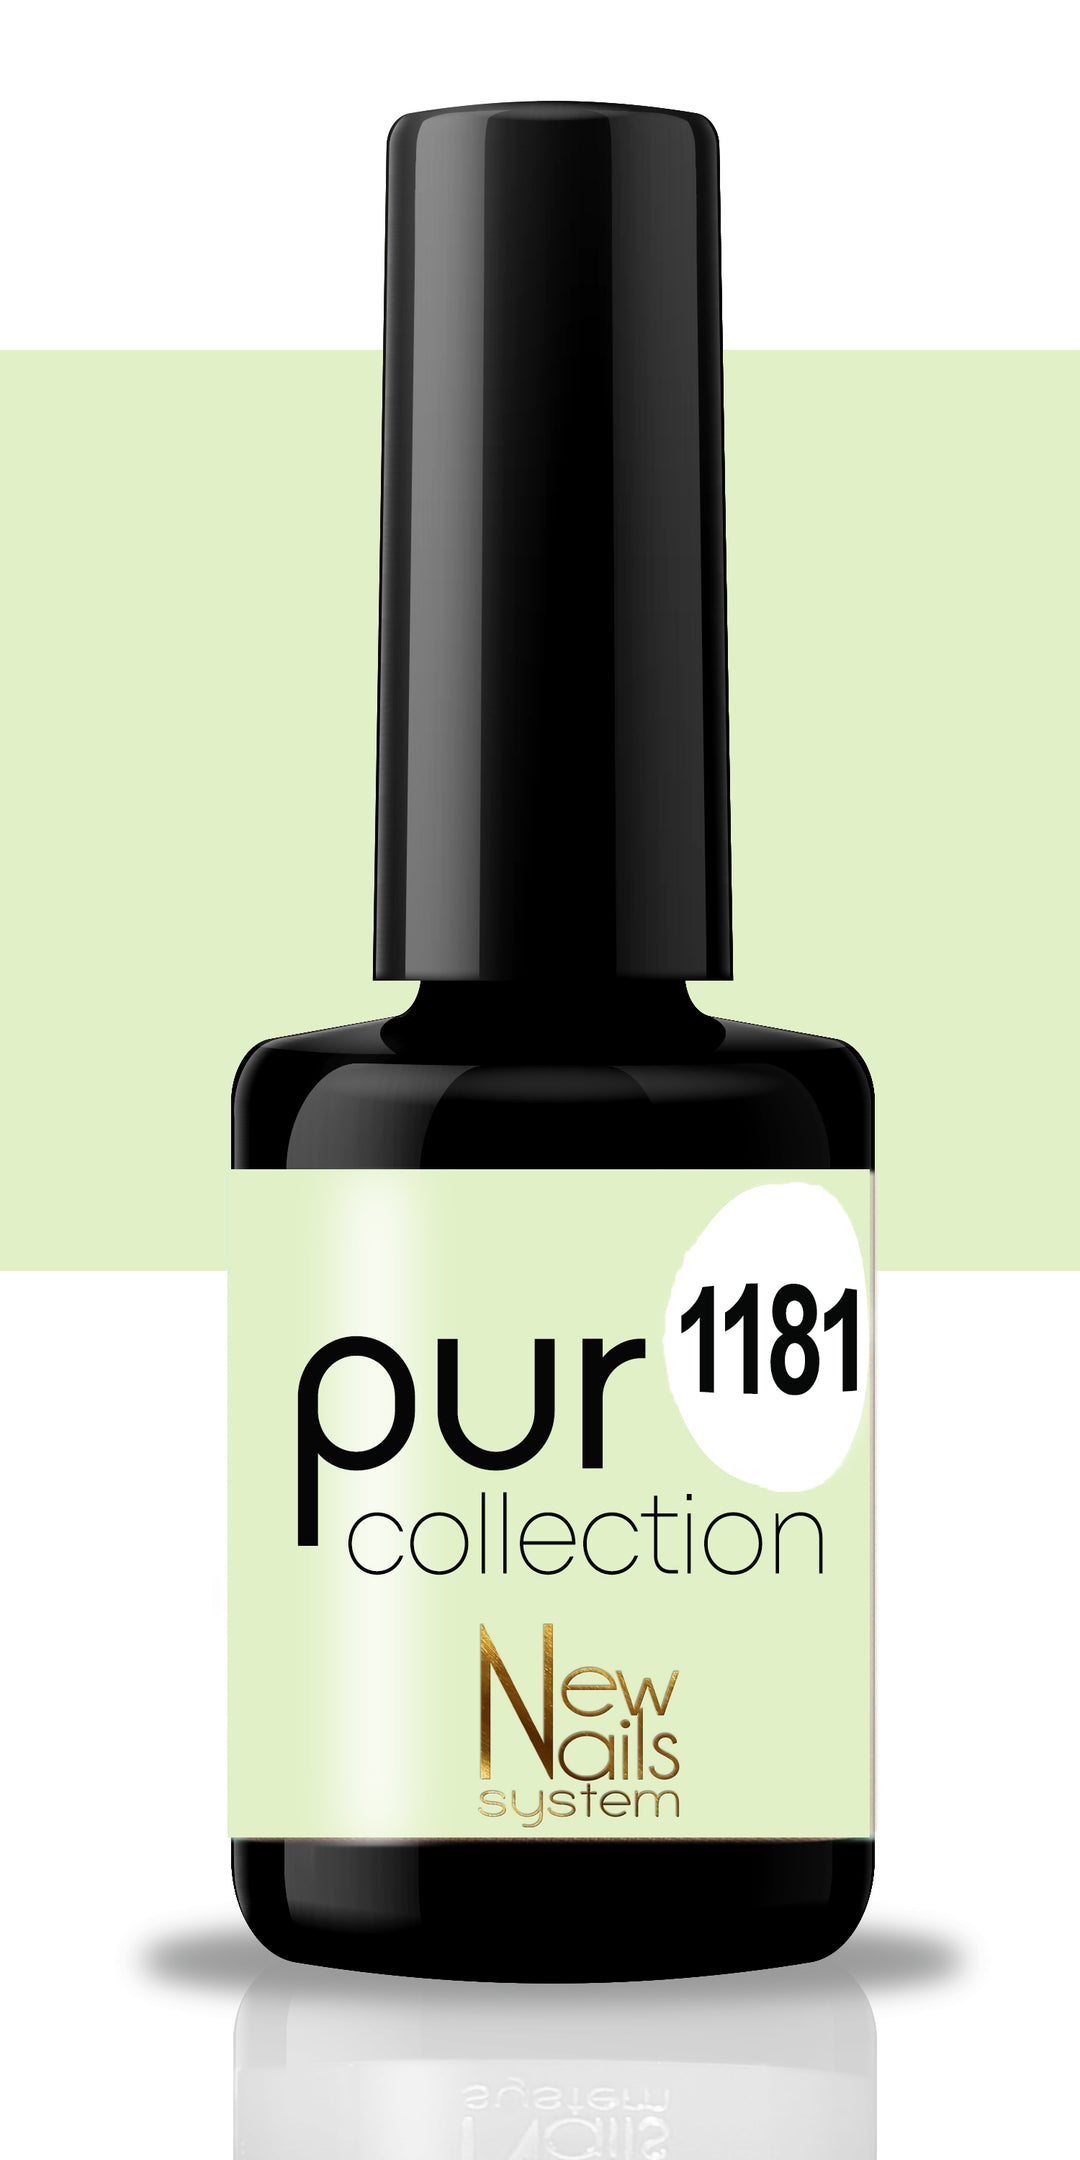 Puro collection 1181 semi-permanent Sweet Pastel color 5ml